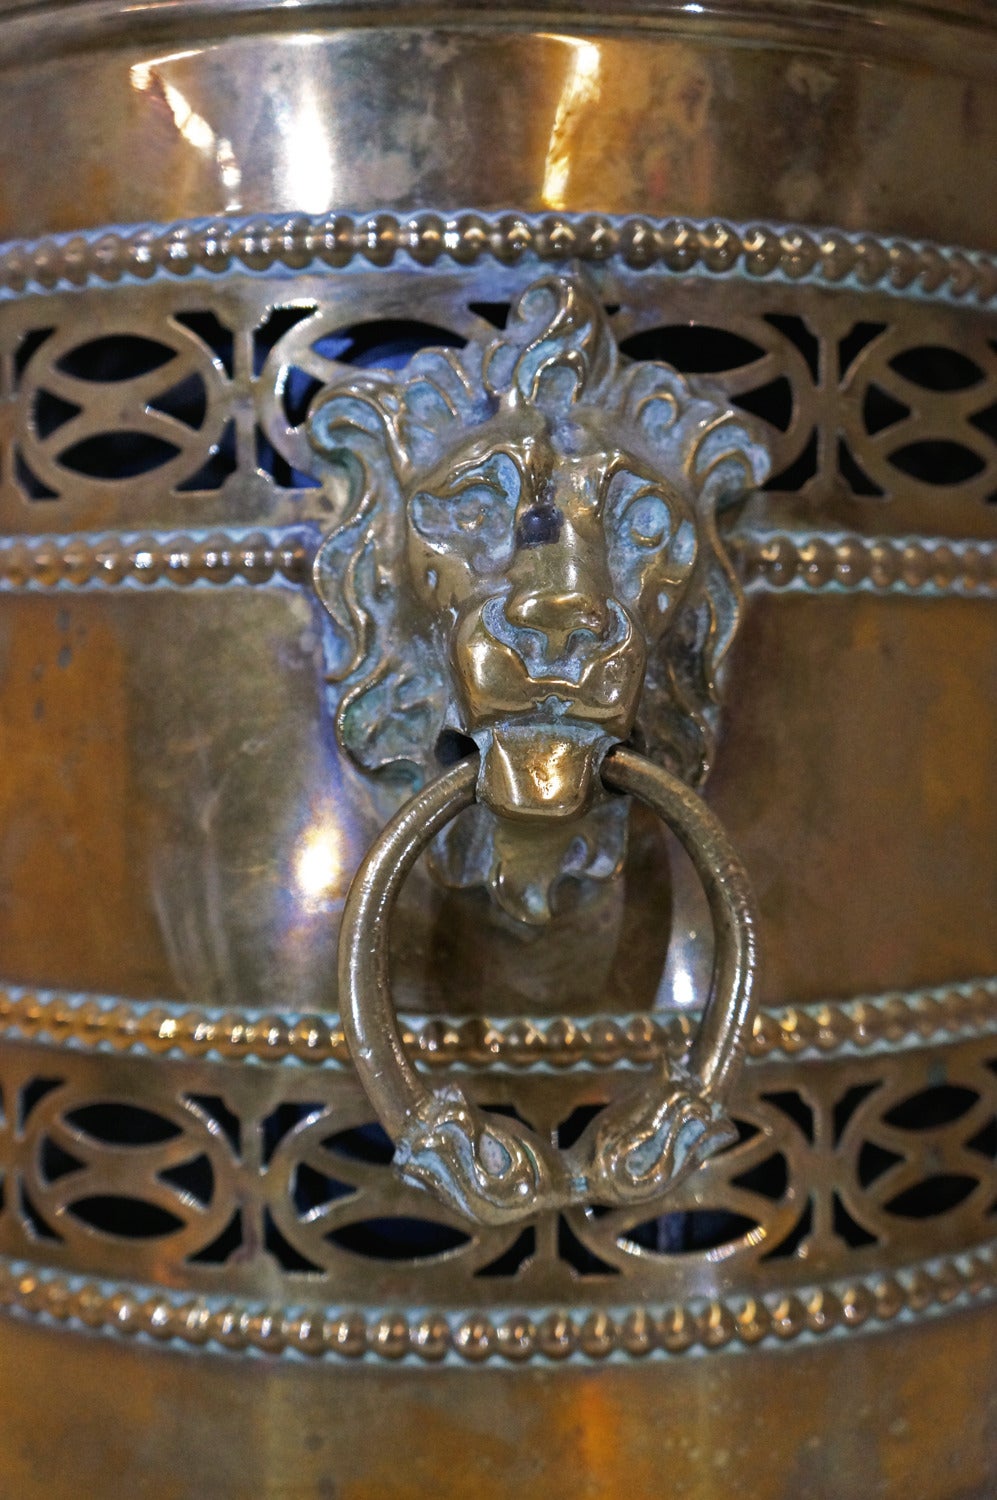 This stunning perforated brass coal scuttle is adorned with lion heads on opposite sides with a brass ring through each mouth. Removable metal insert allows for easy transport and disposal of ash and coals. 

*Not available for sale or to ship in